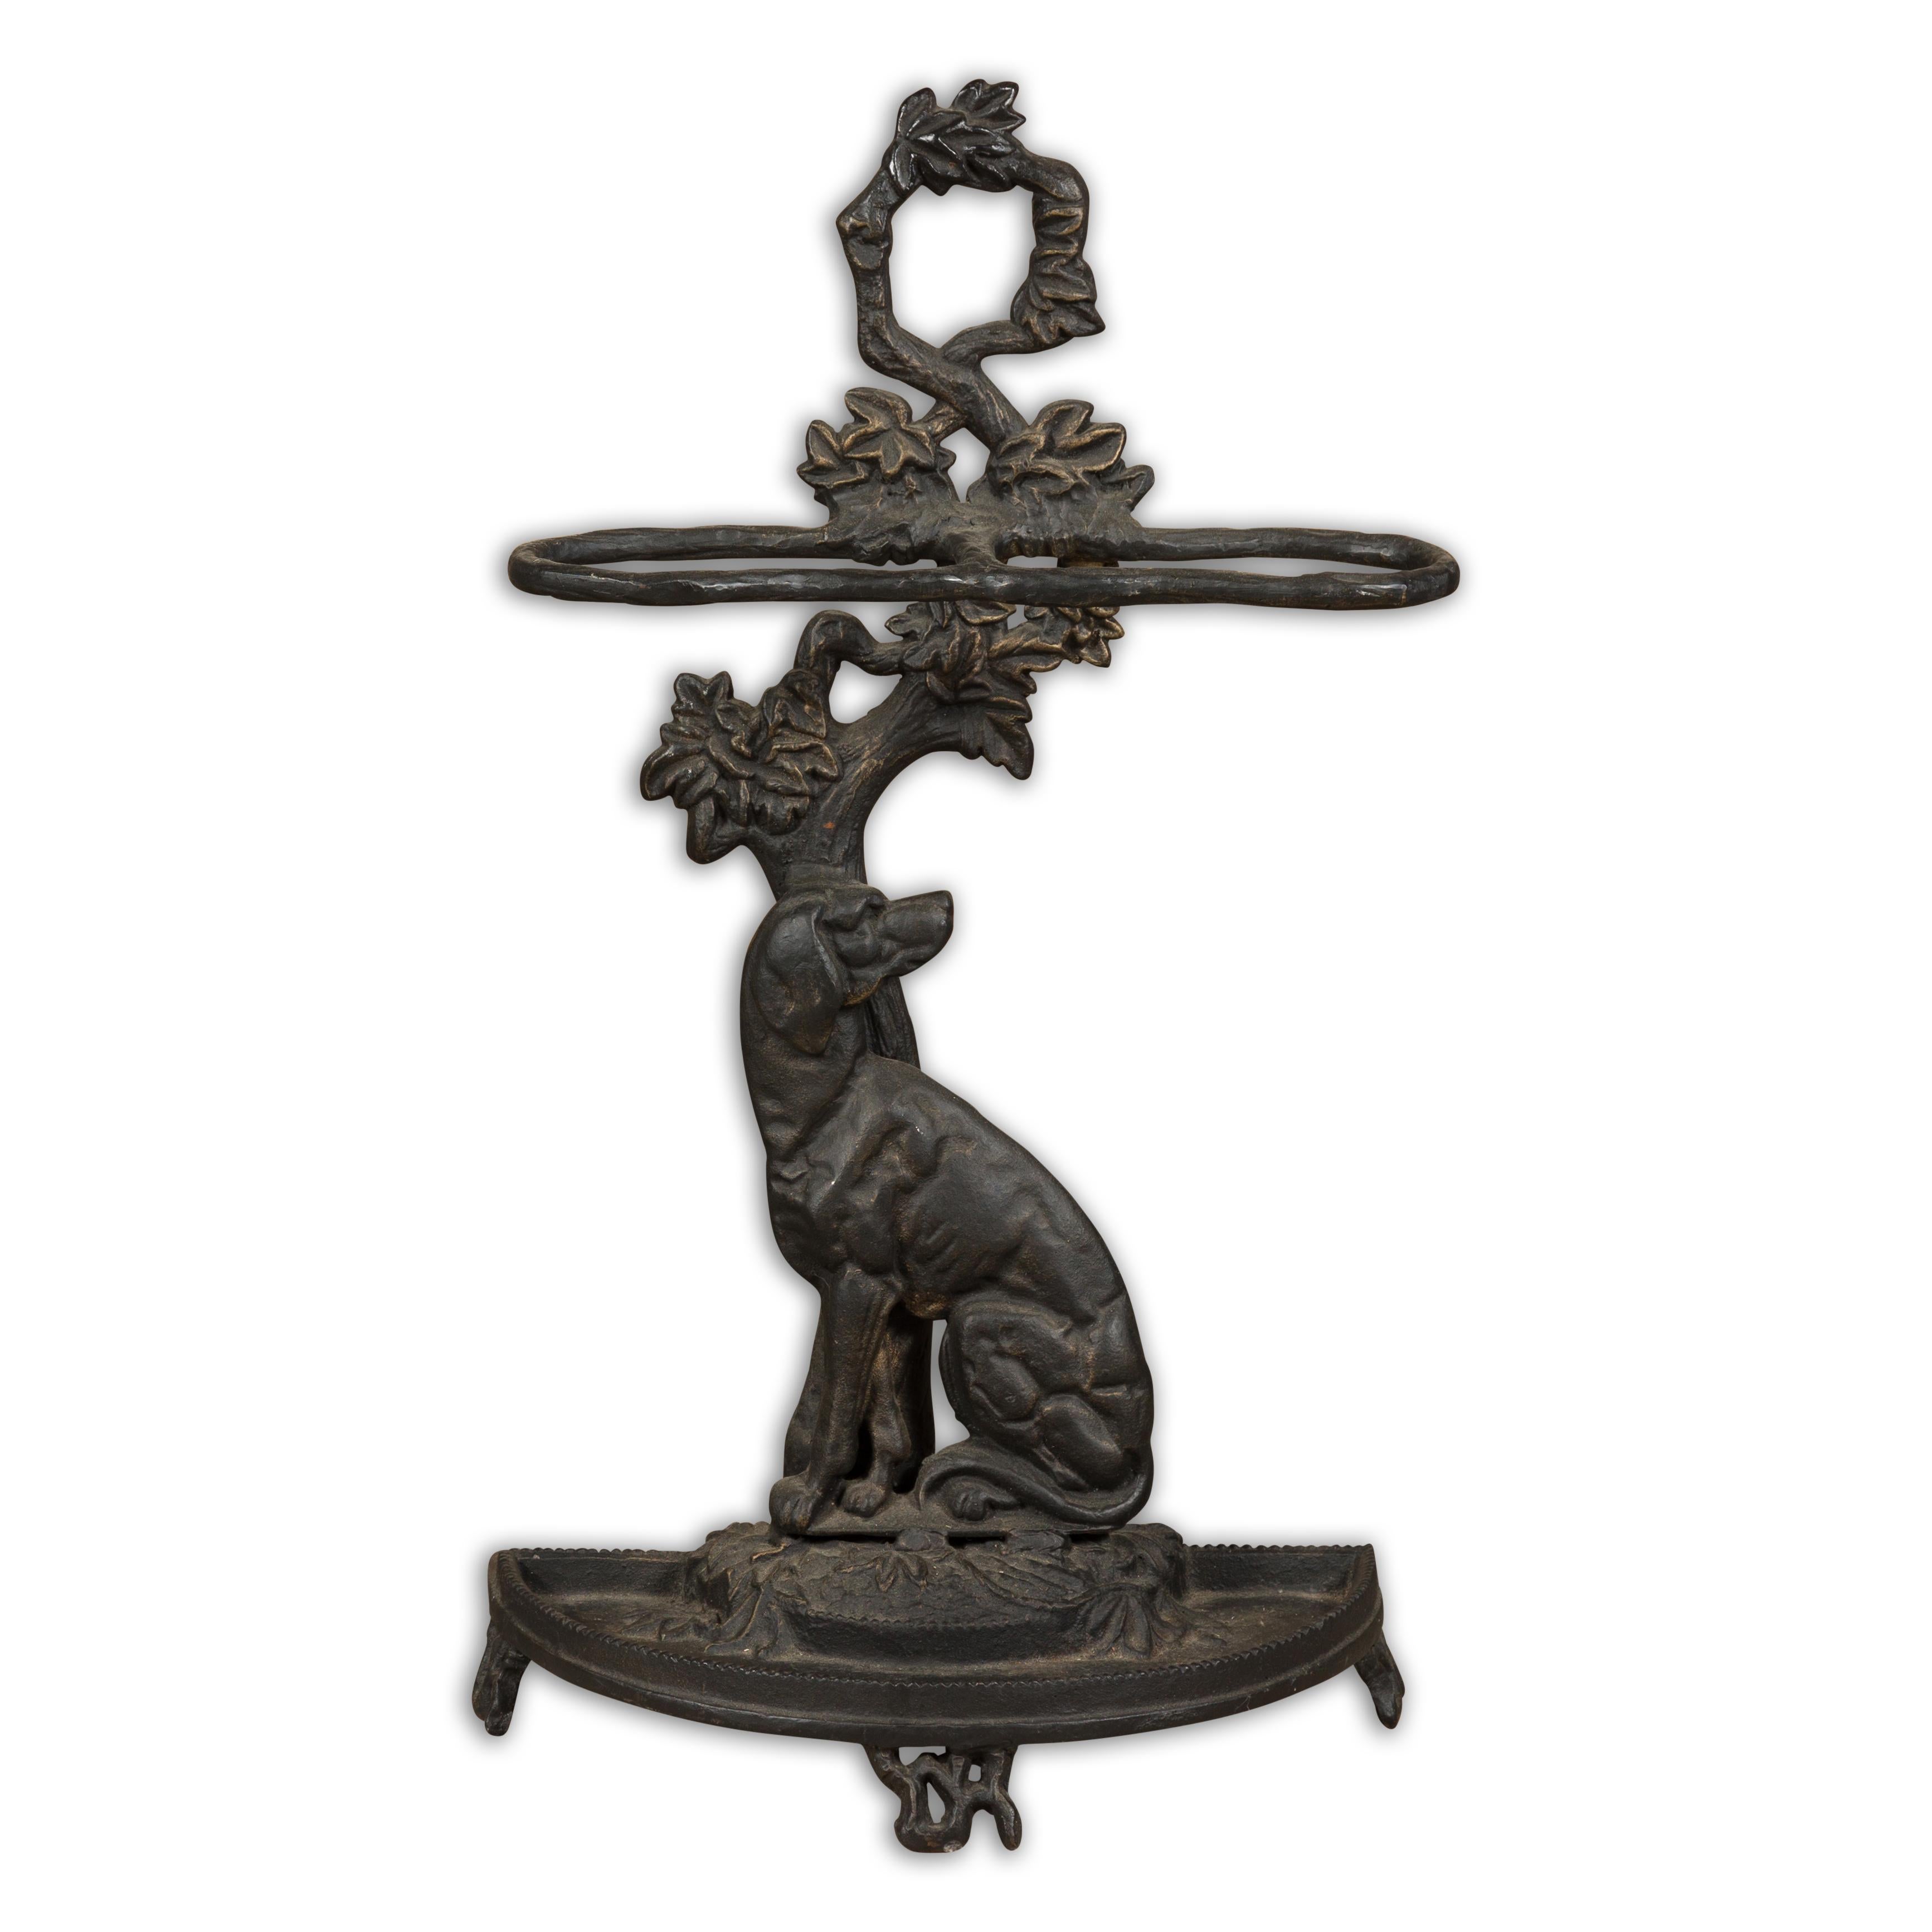 An English iron umbrella stand from the 20th century depicting a dog obediently sitting in front of a tree. Embrace the whimsical charm of this 20th-century English iron umbrella stand, a perfect amalgamation of practicality and aesthetic appeal. A